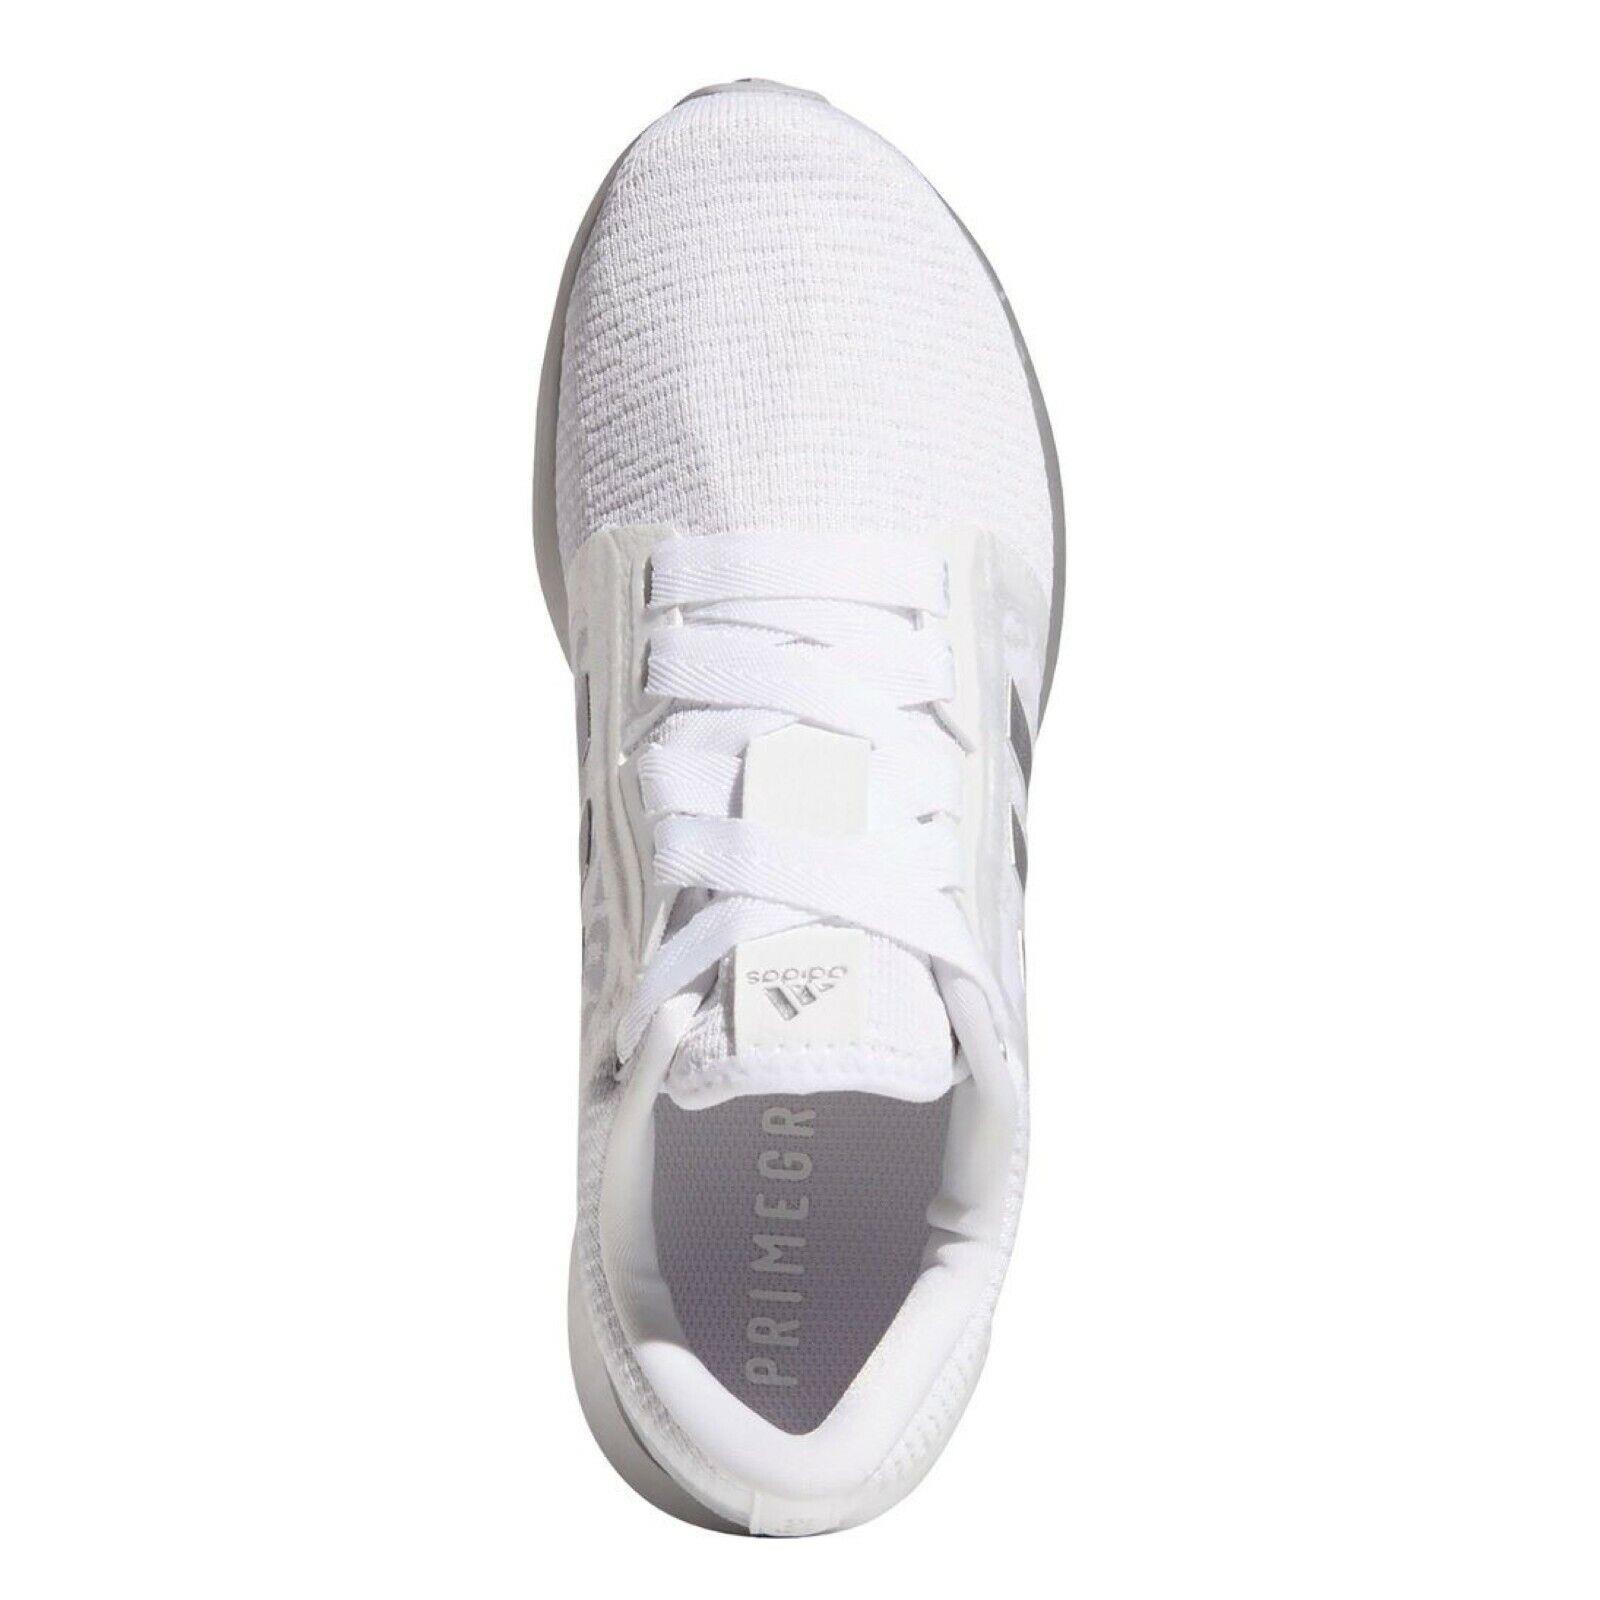 Adidas shoes Edge Lux - White , GREY/WHITE/LEOPARD Manufacturer 2